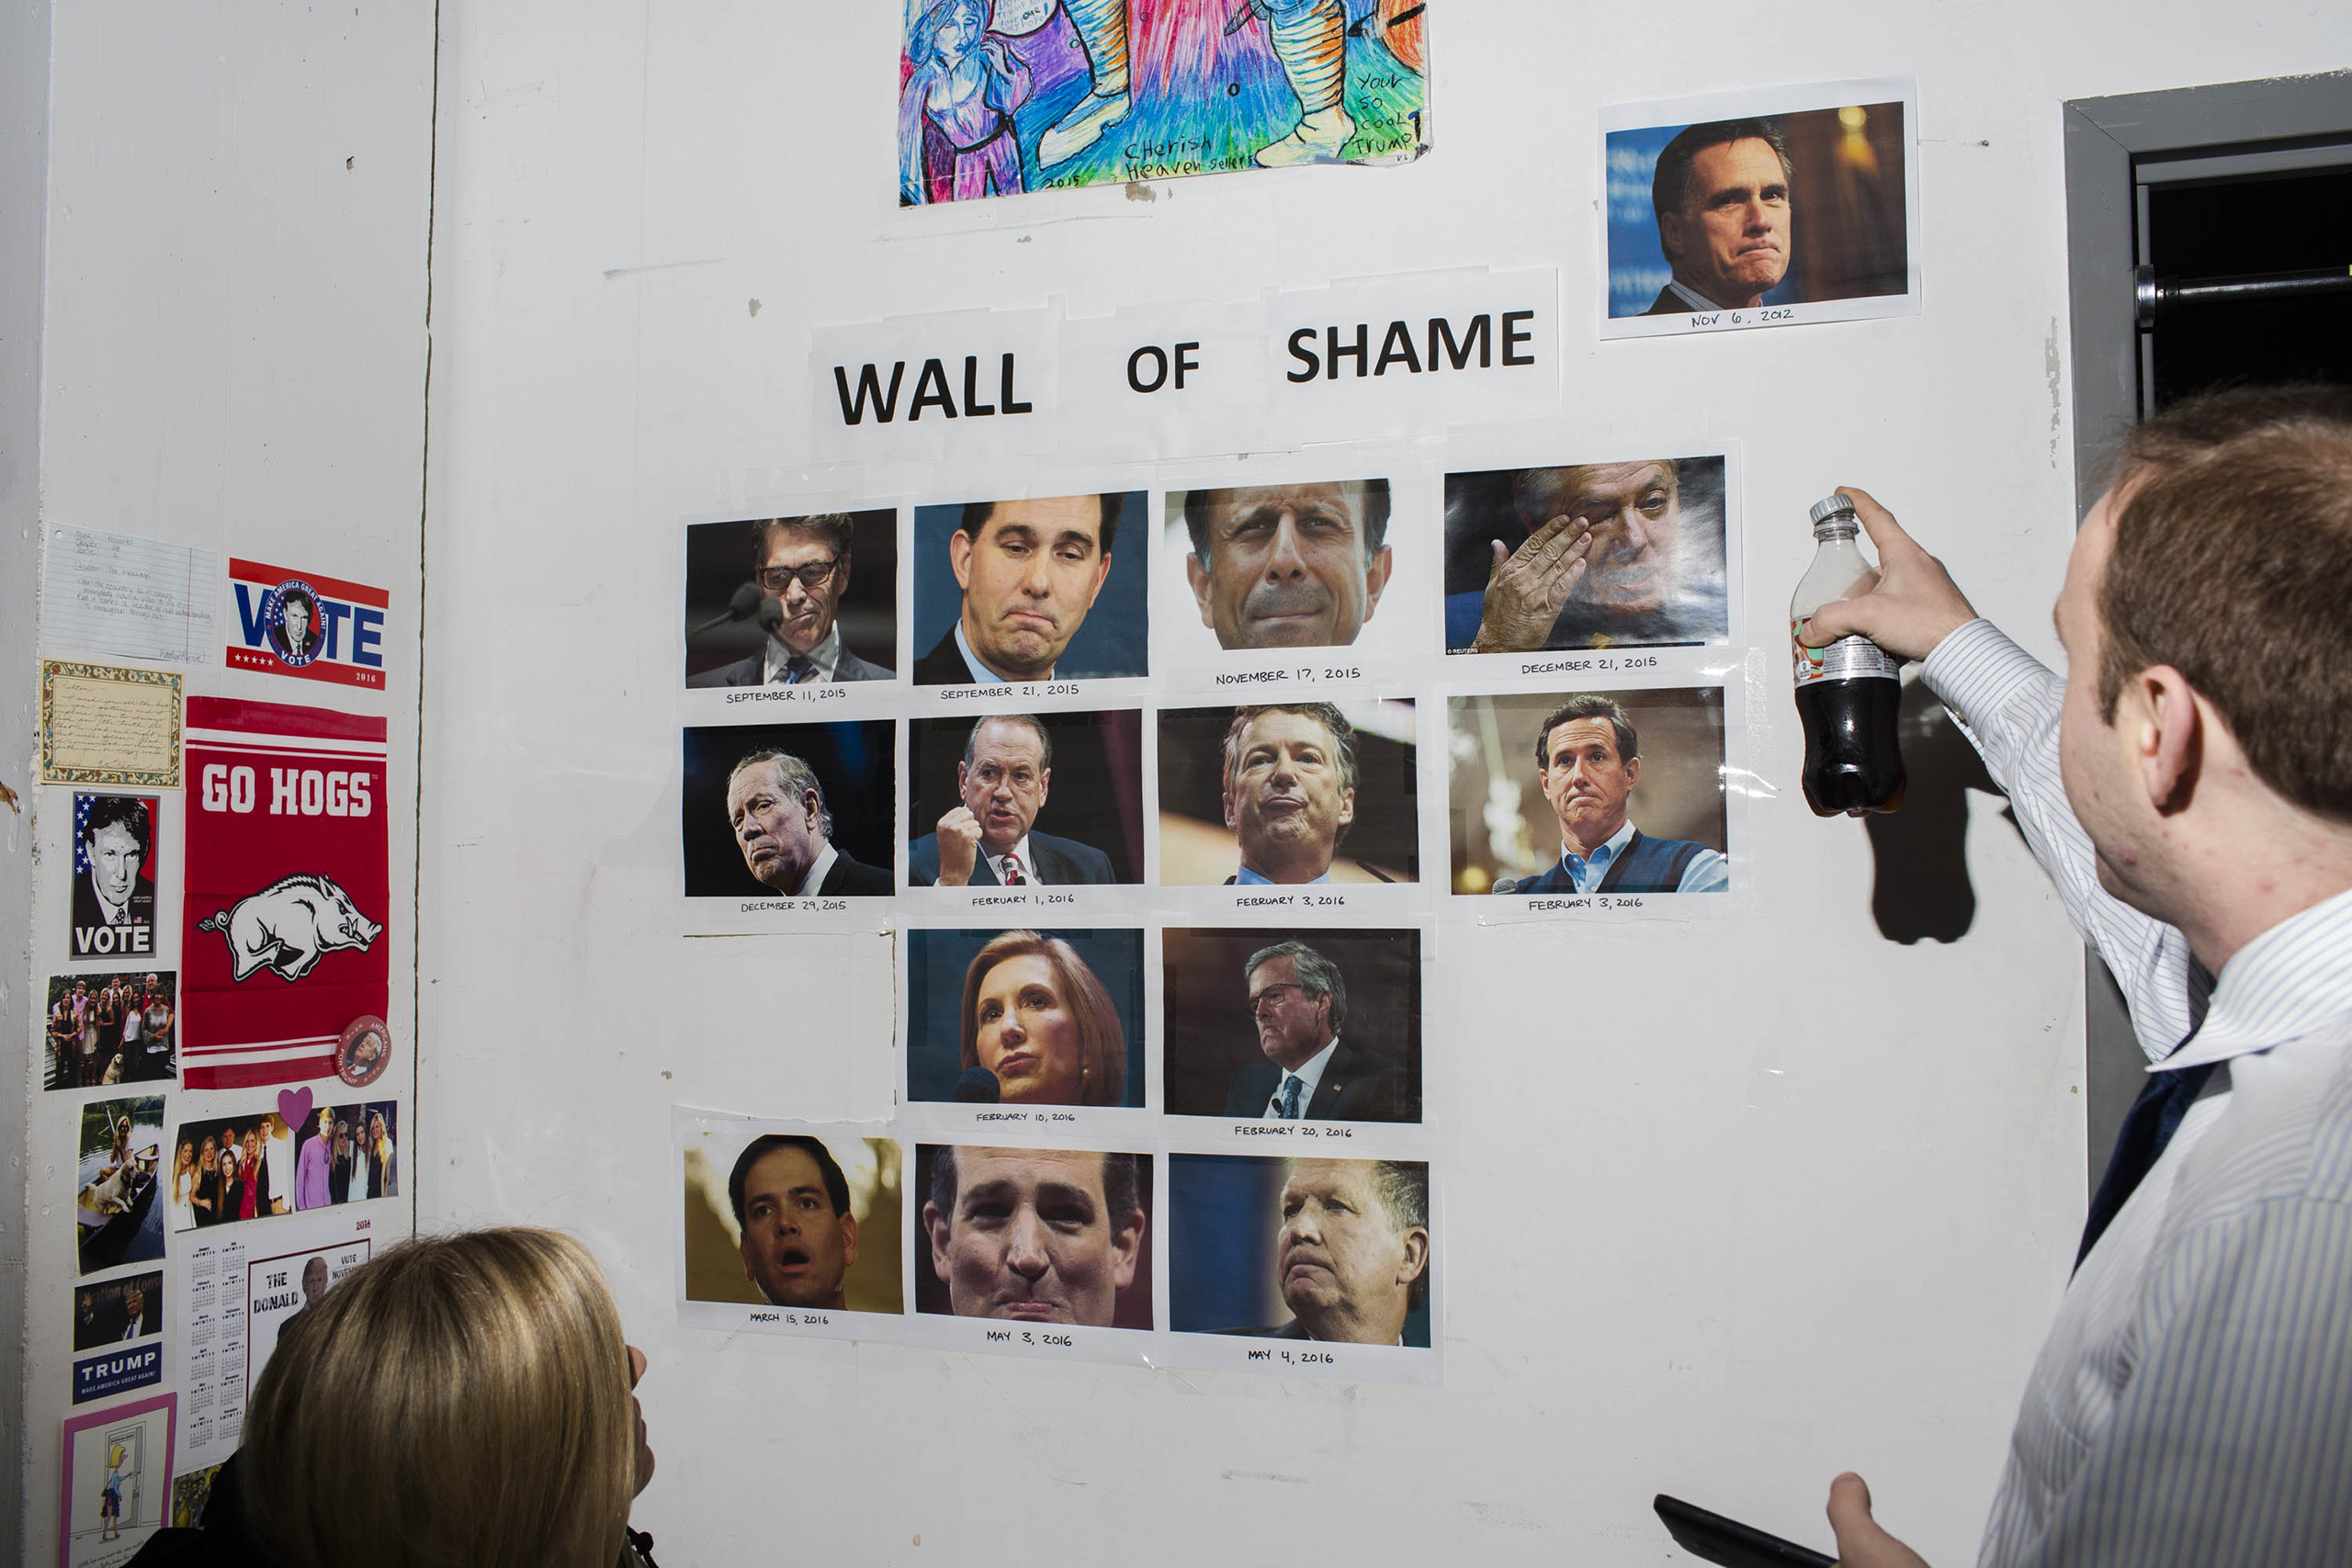 The wall of shame featuring Republican leaders who have criticized Trump, like former presidential candidate Mitt Romney inside the campaign headquarters of Donald Trump on May 24, 2016, New York City. (Landon Nordeman for TIME)